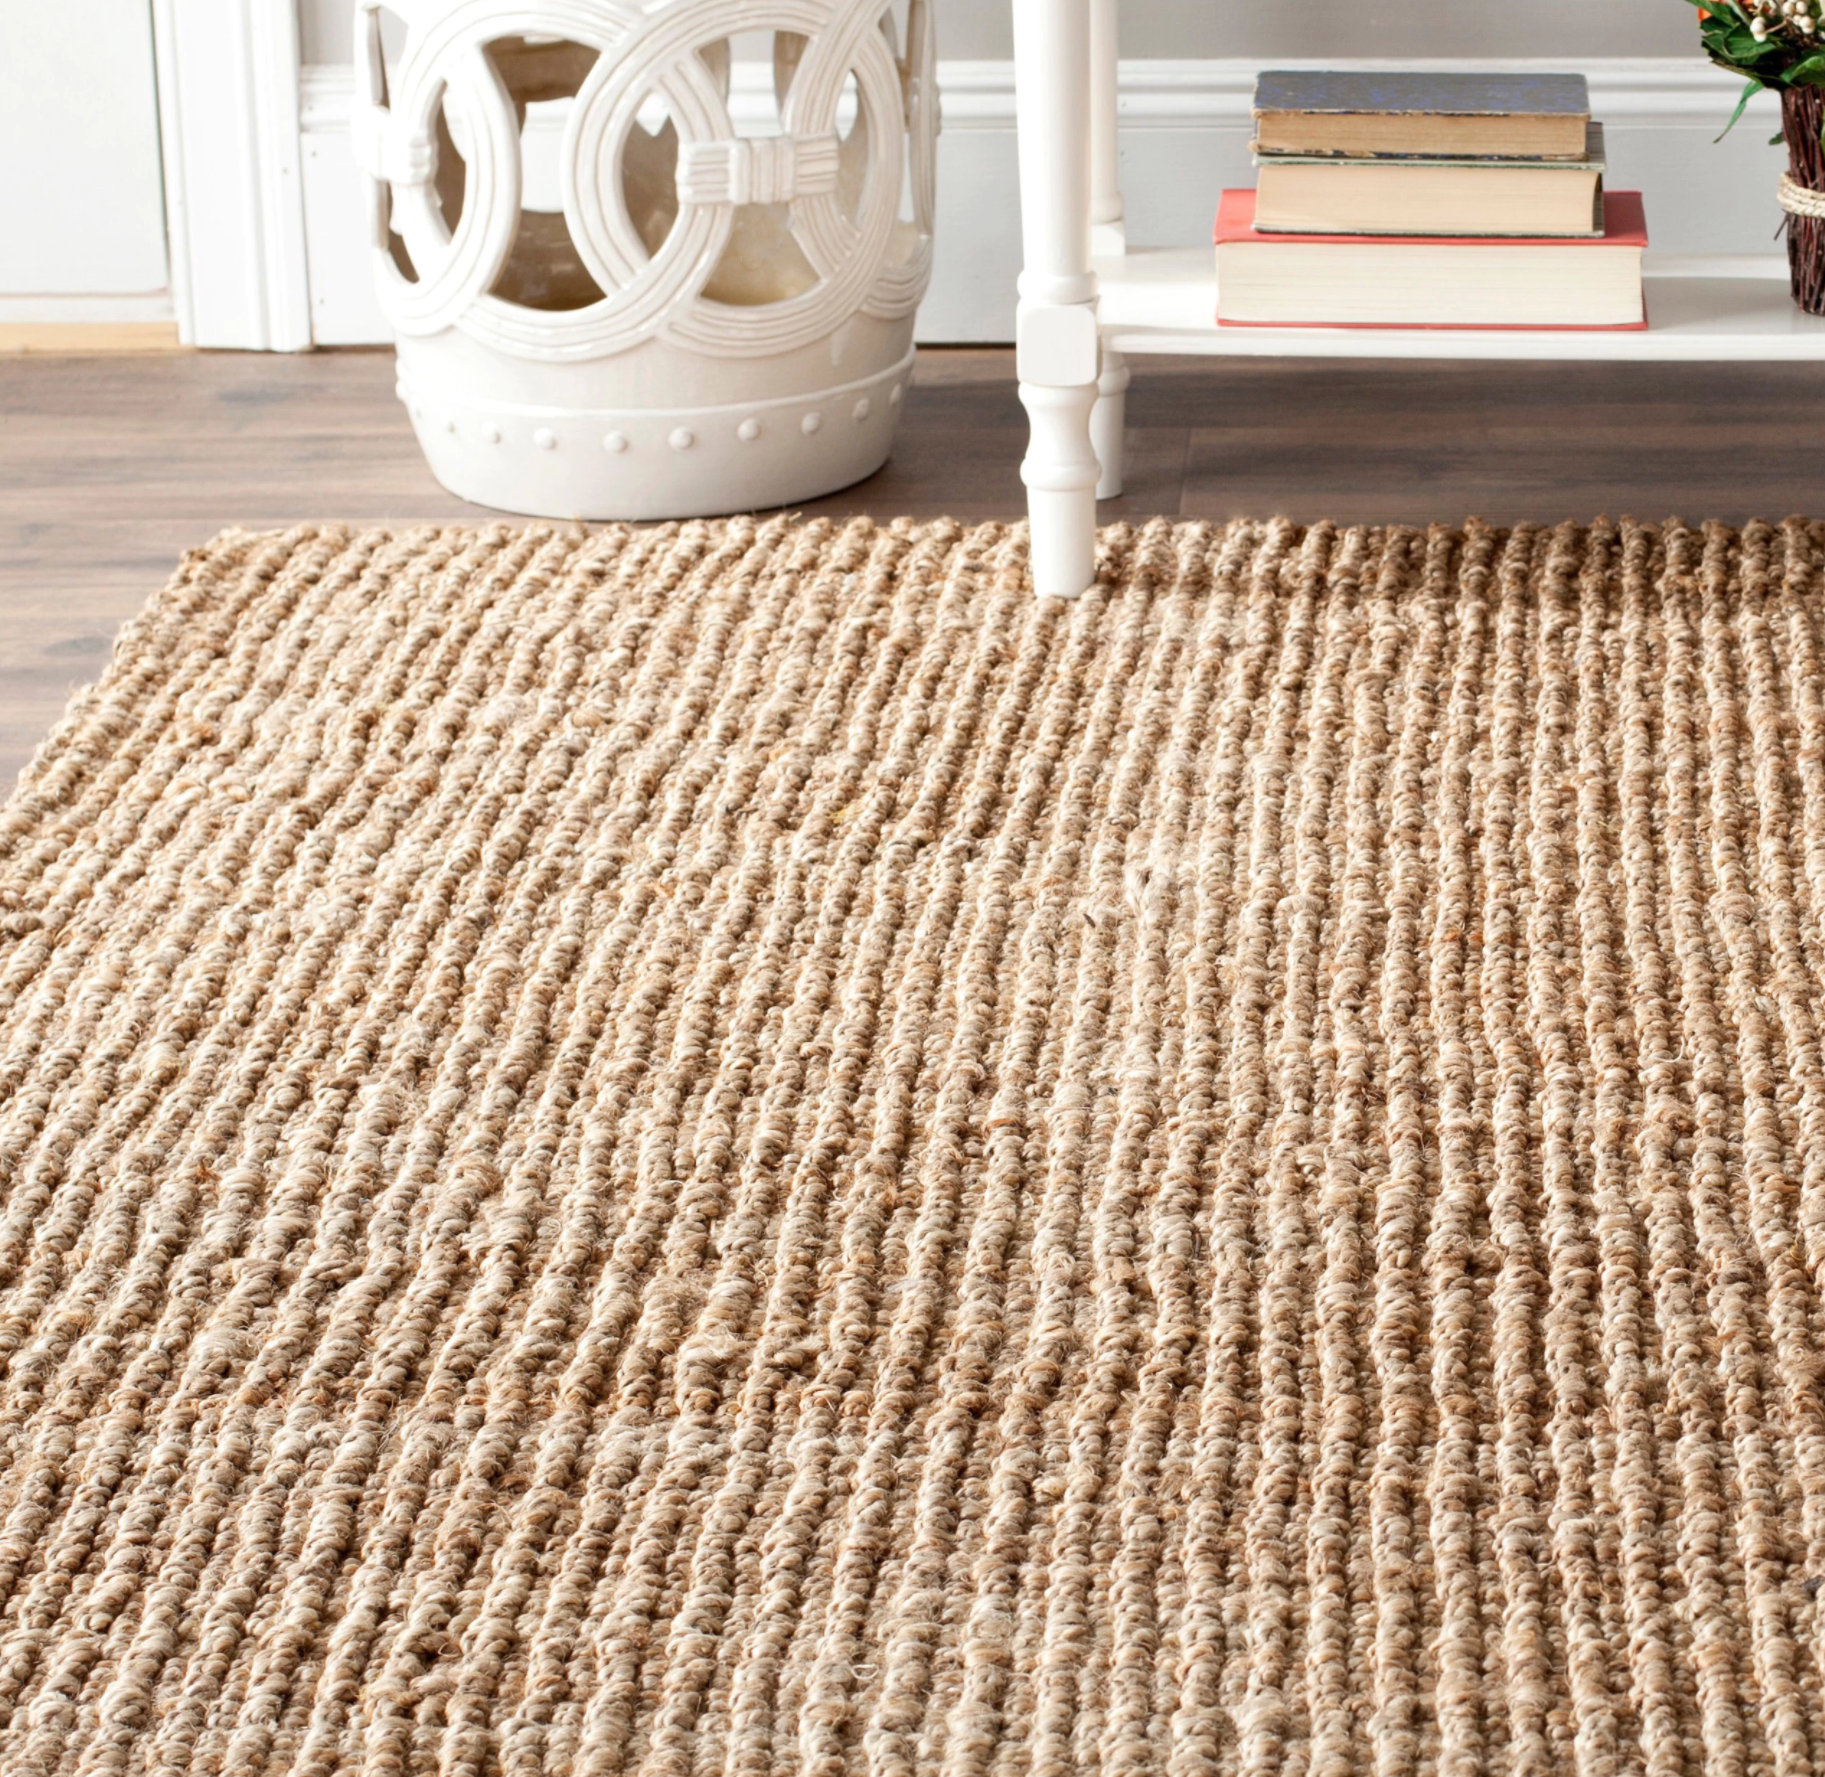 How to clean seagrass rugs?